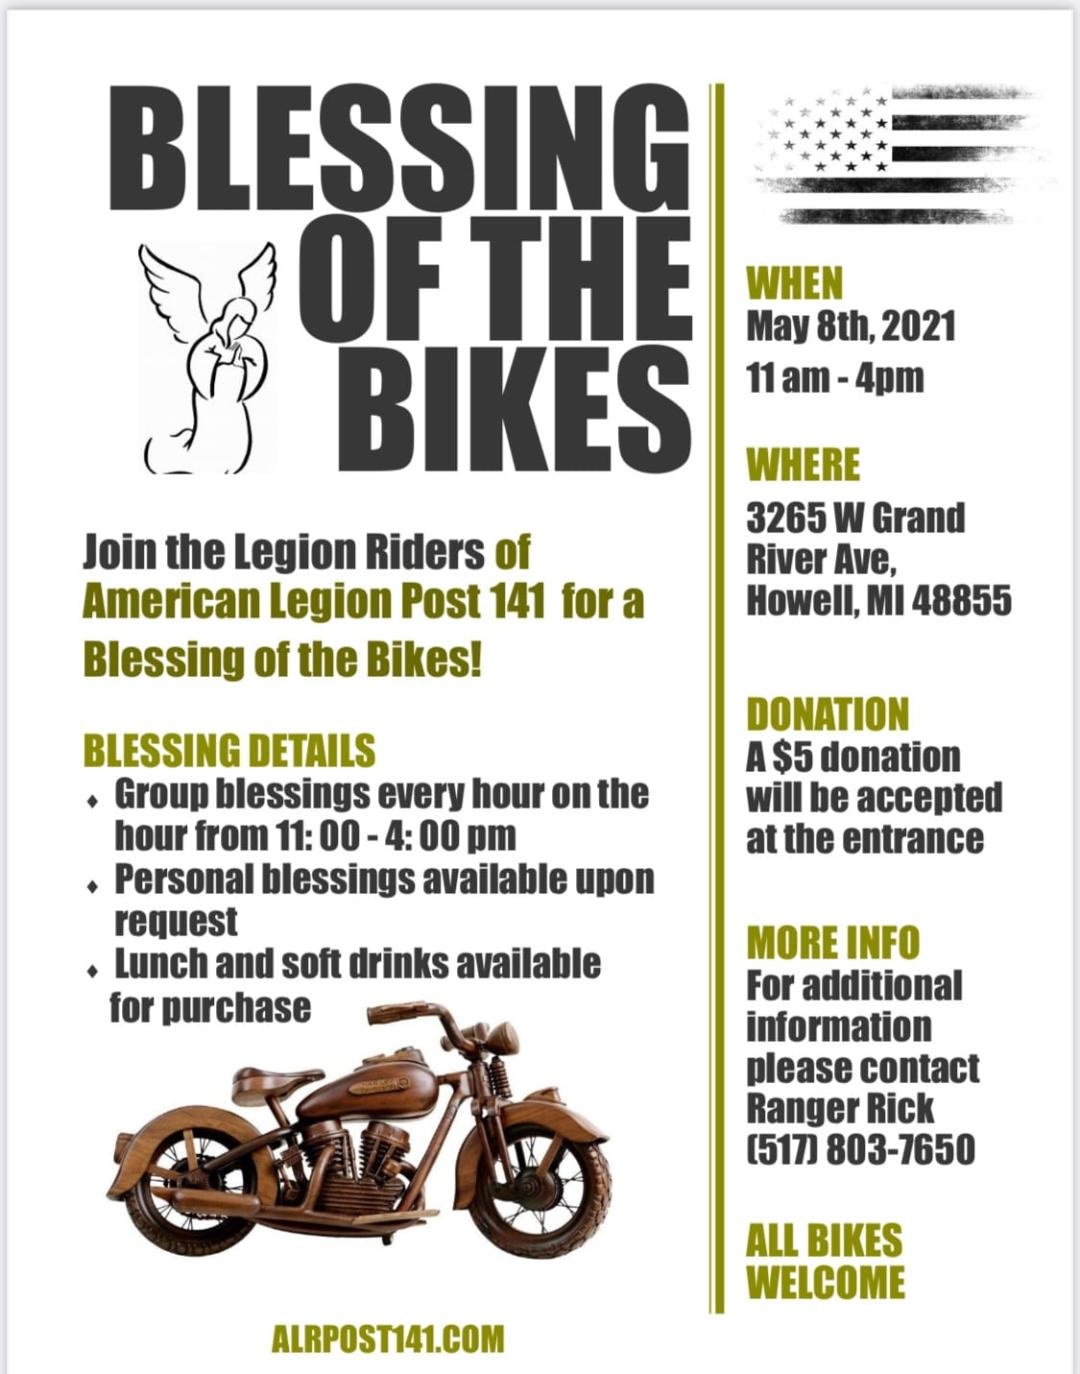 ALR Post 141 Blessing of the Bikes Motorcycle Roads